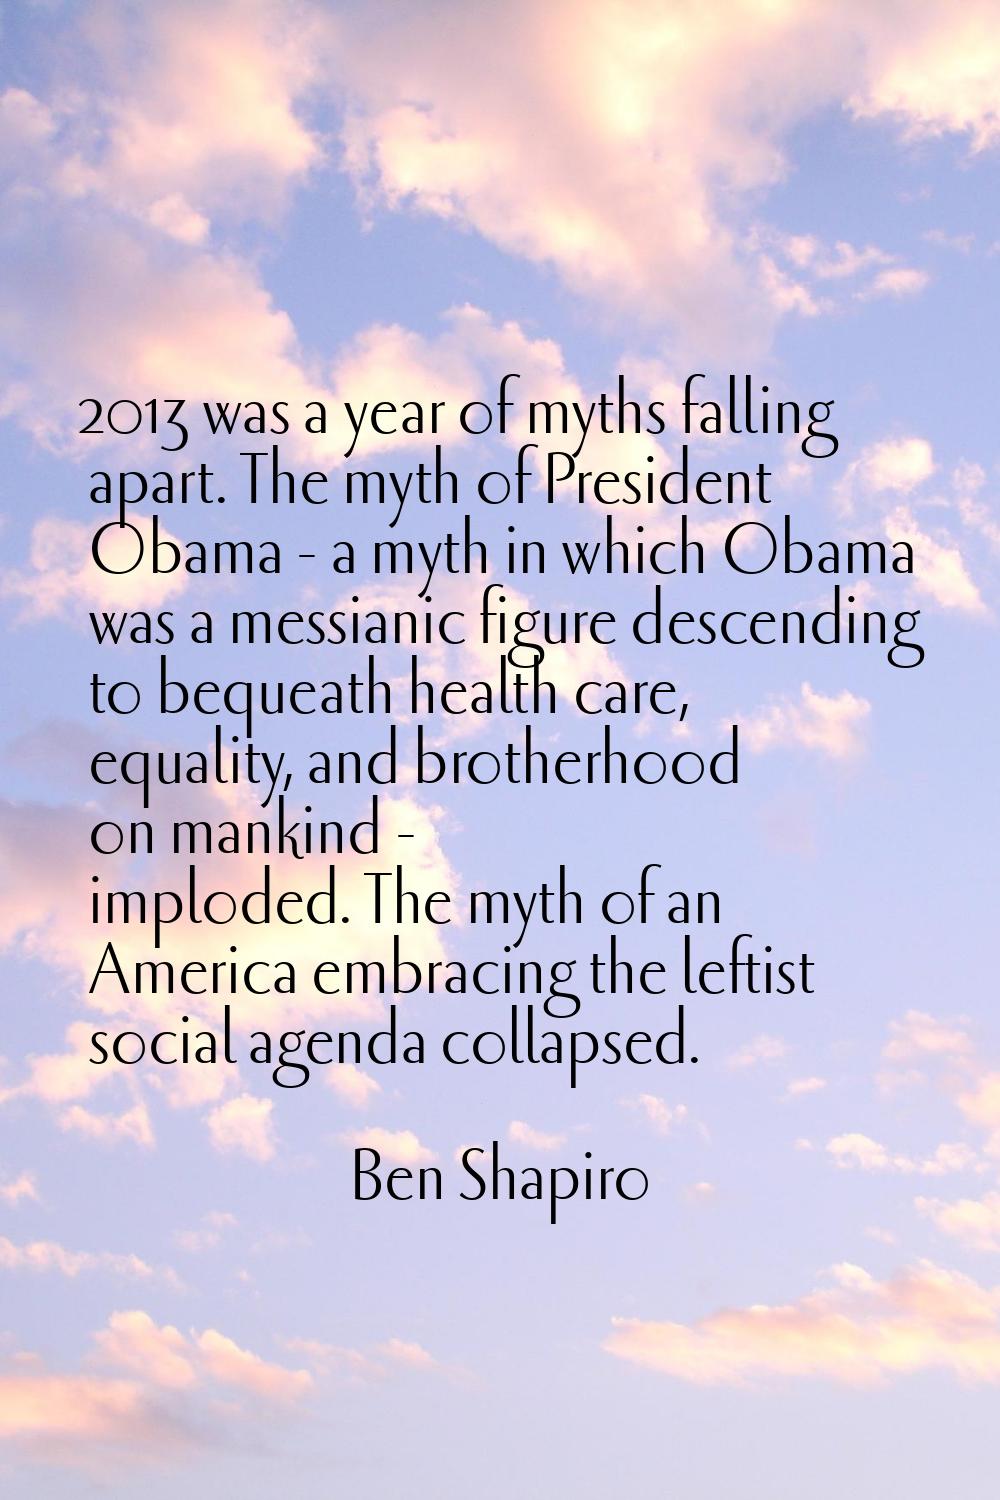 2013 was a year of myths falling apart. The myth of President Obama - a myth in which Obama was a m